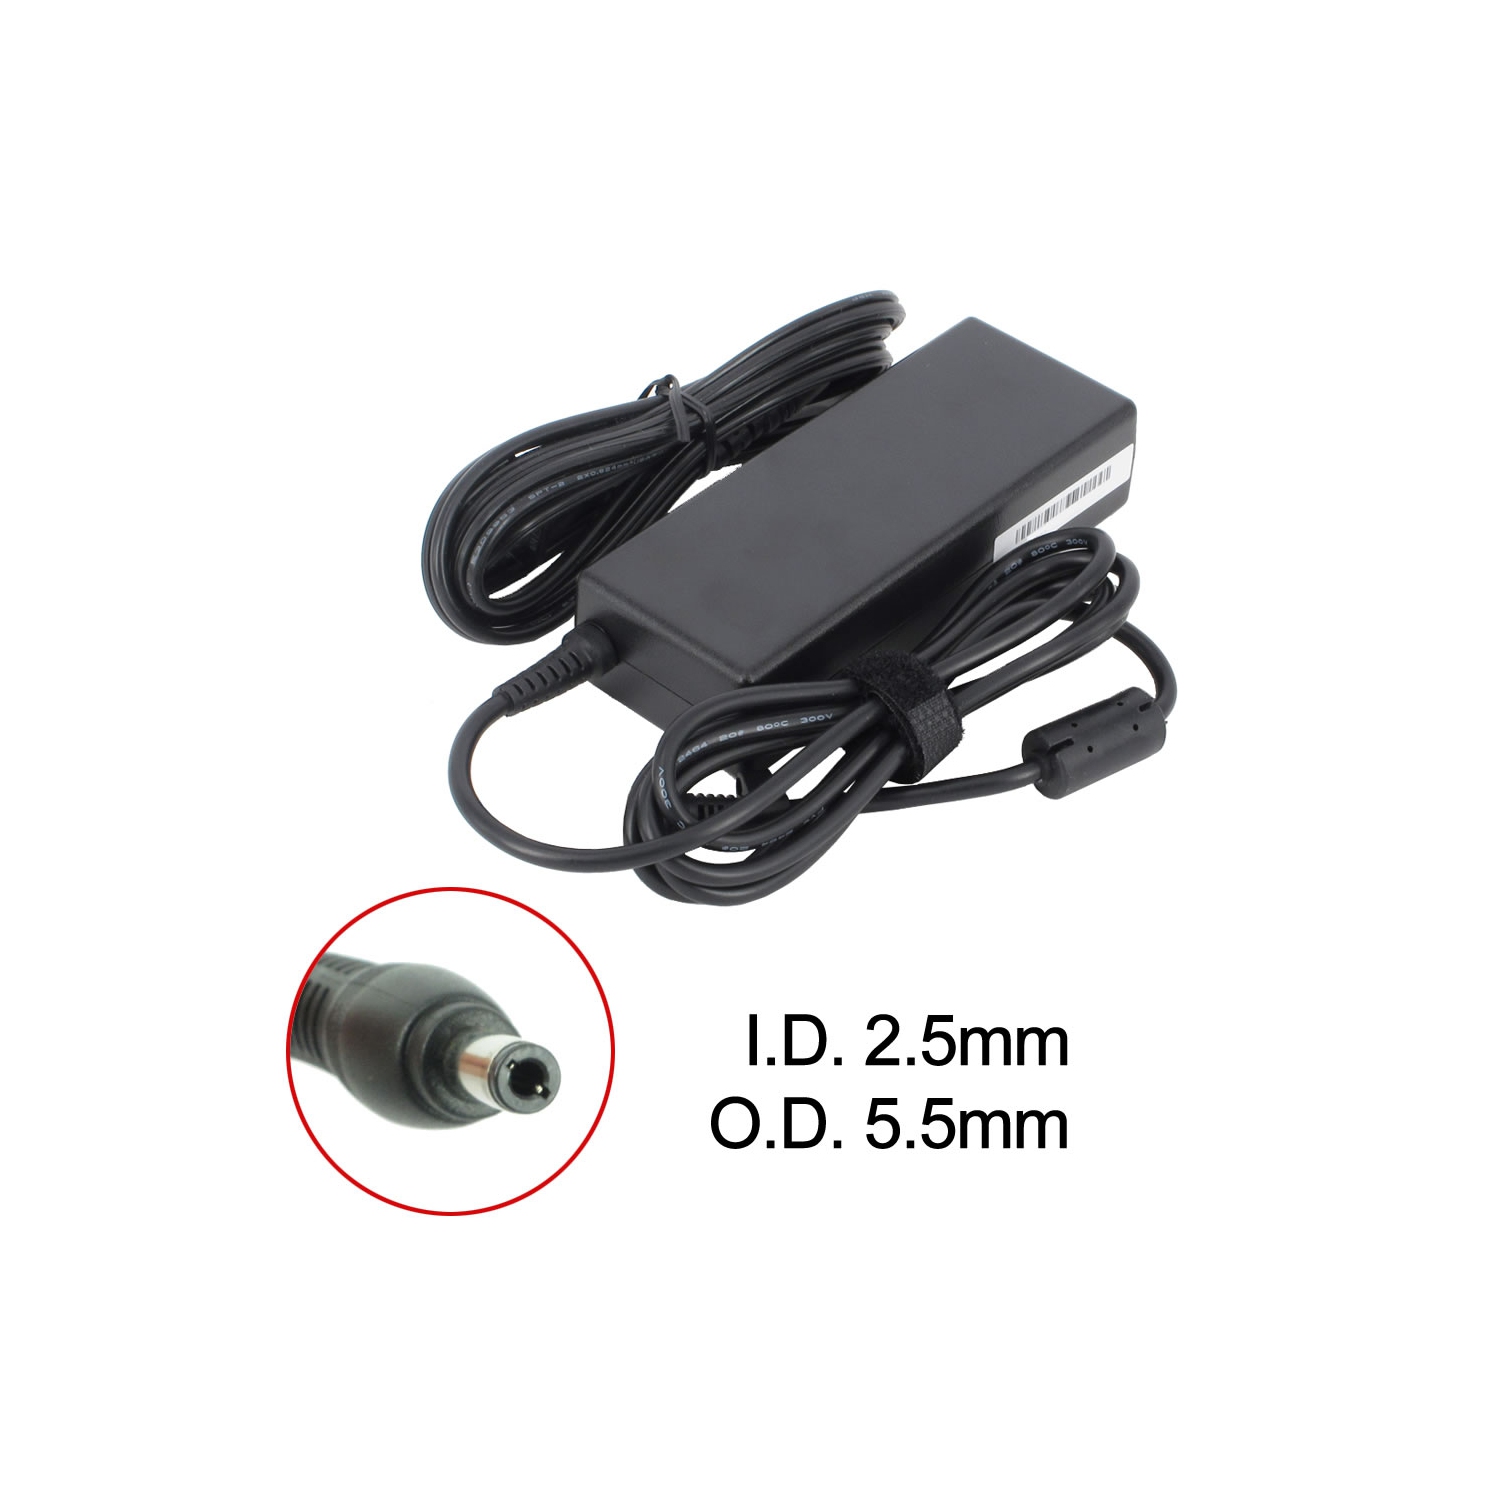 New Laptop AC Adapter for Acer Ferrari 4002, 0220A1990, 1528569, 90-N00PW5200T, ADP-65 HB BBCF, AZ121508, PA-1900-66